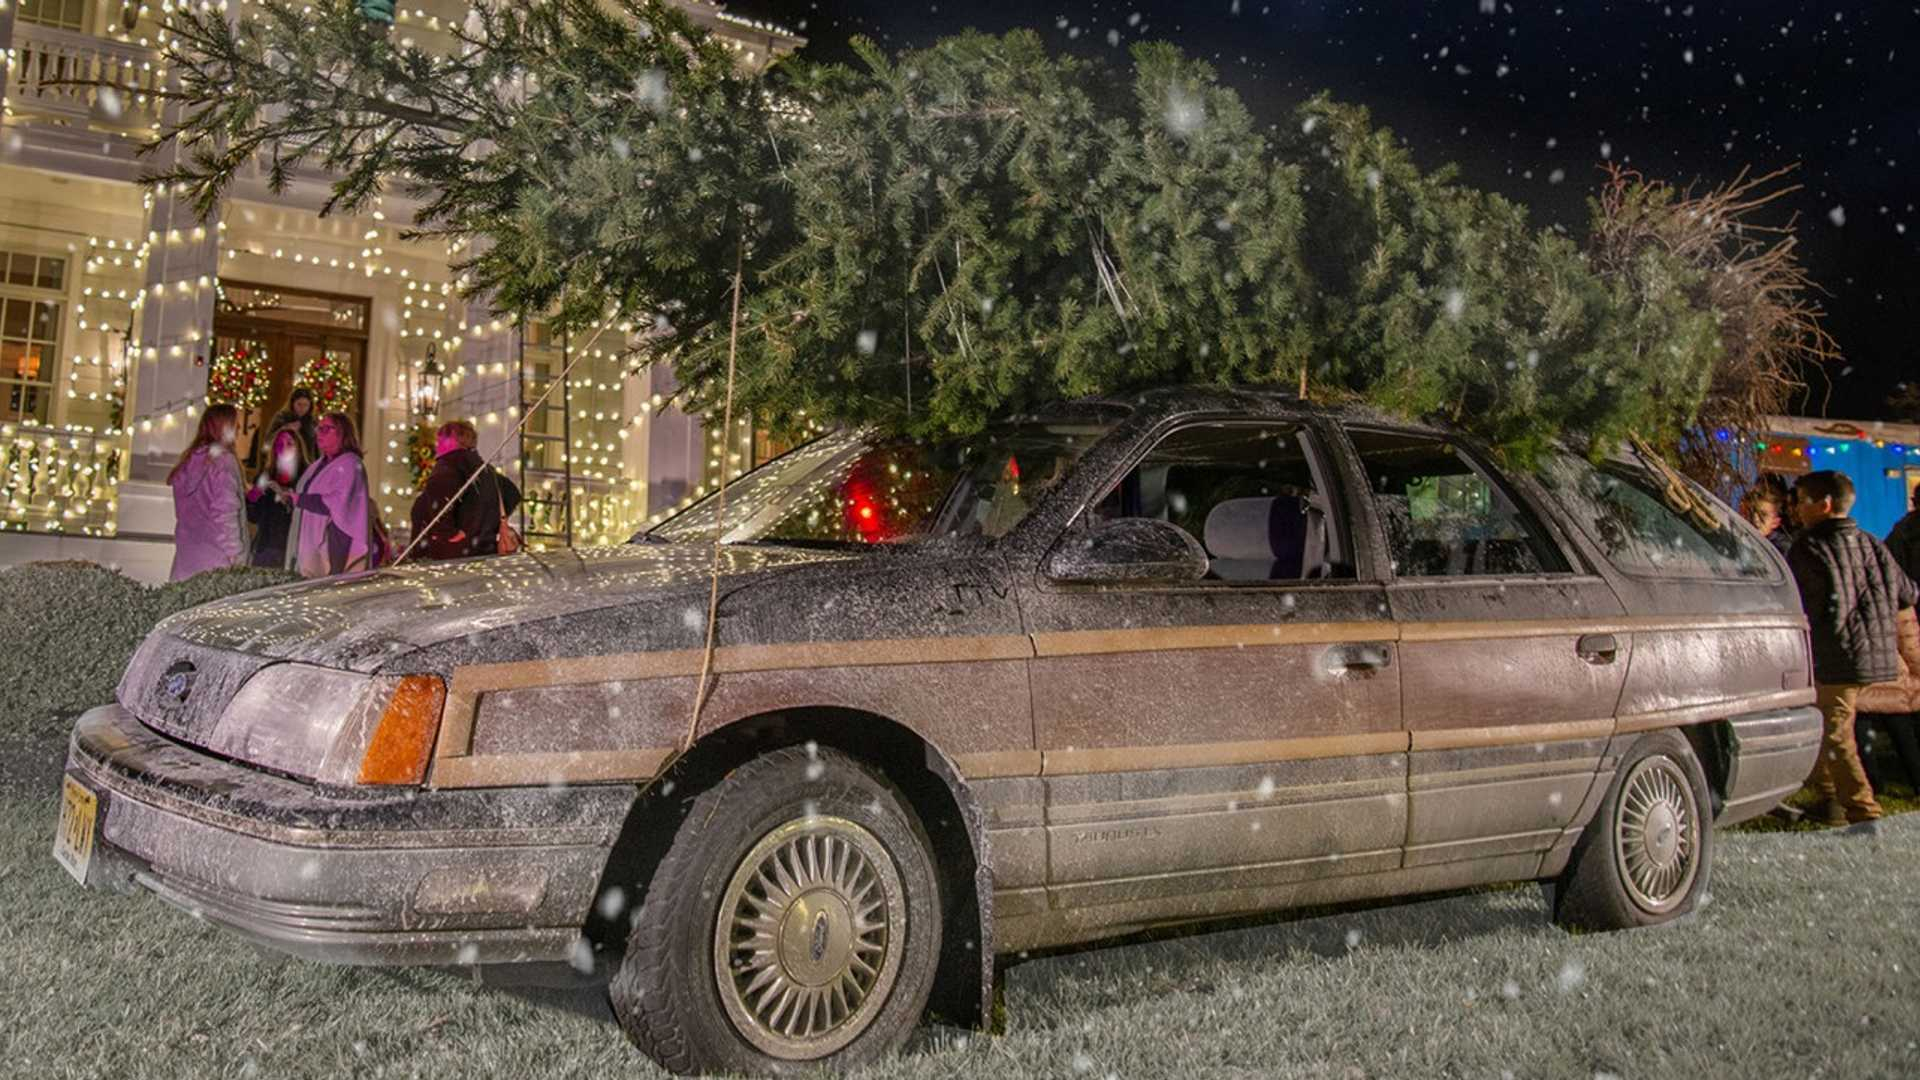 1920x1080 Home-Built 'Christmas Vacation' Display Includes Movie's Iconic Vehicles | Motorious